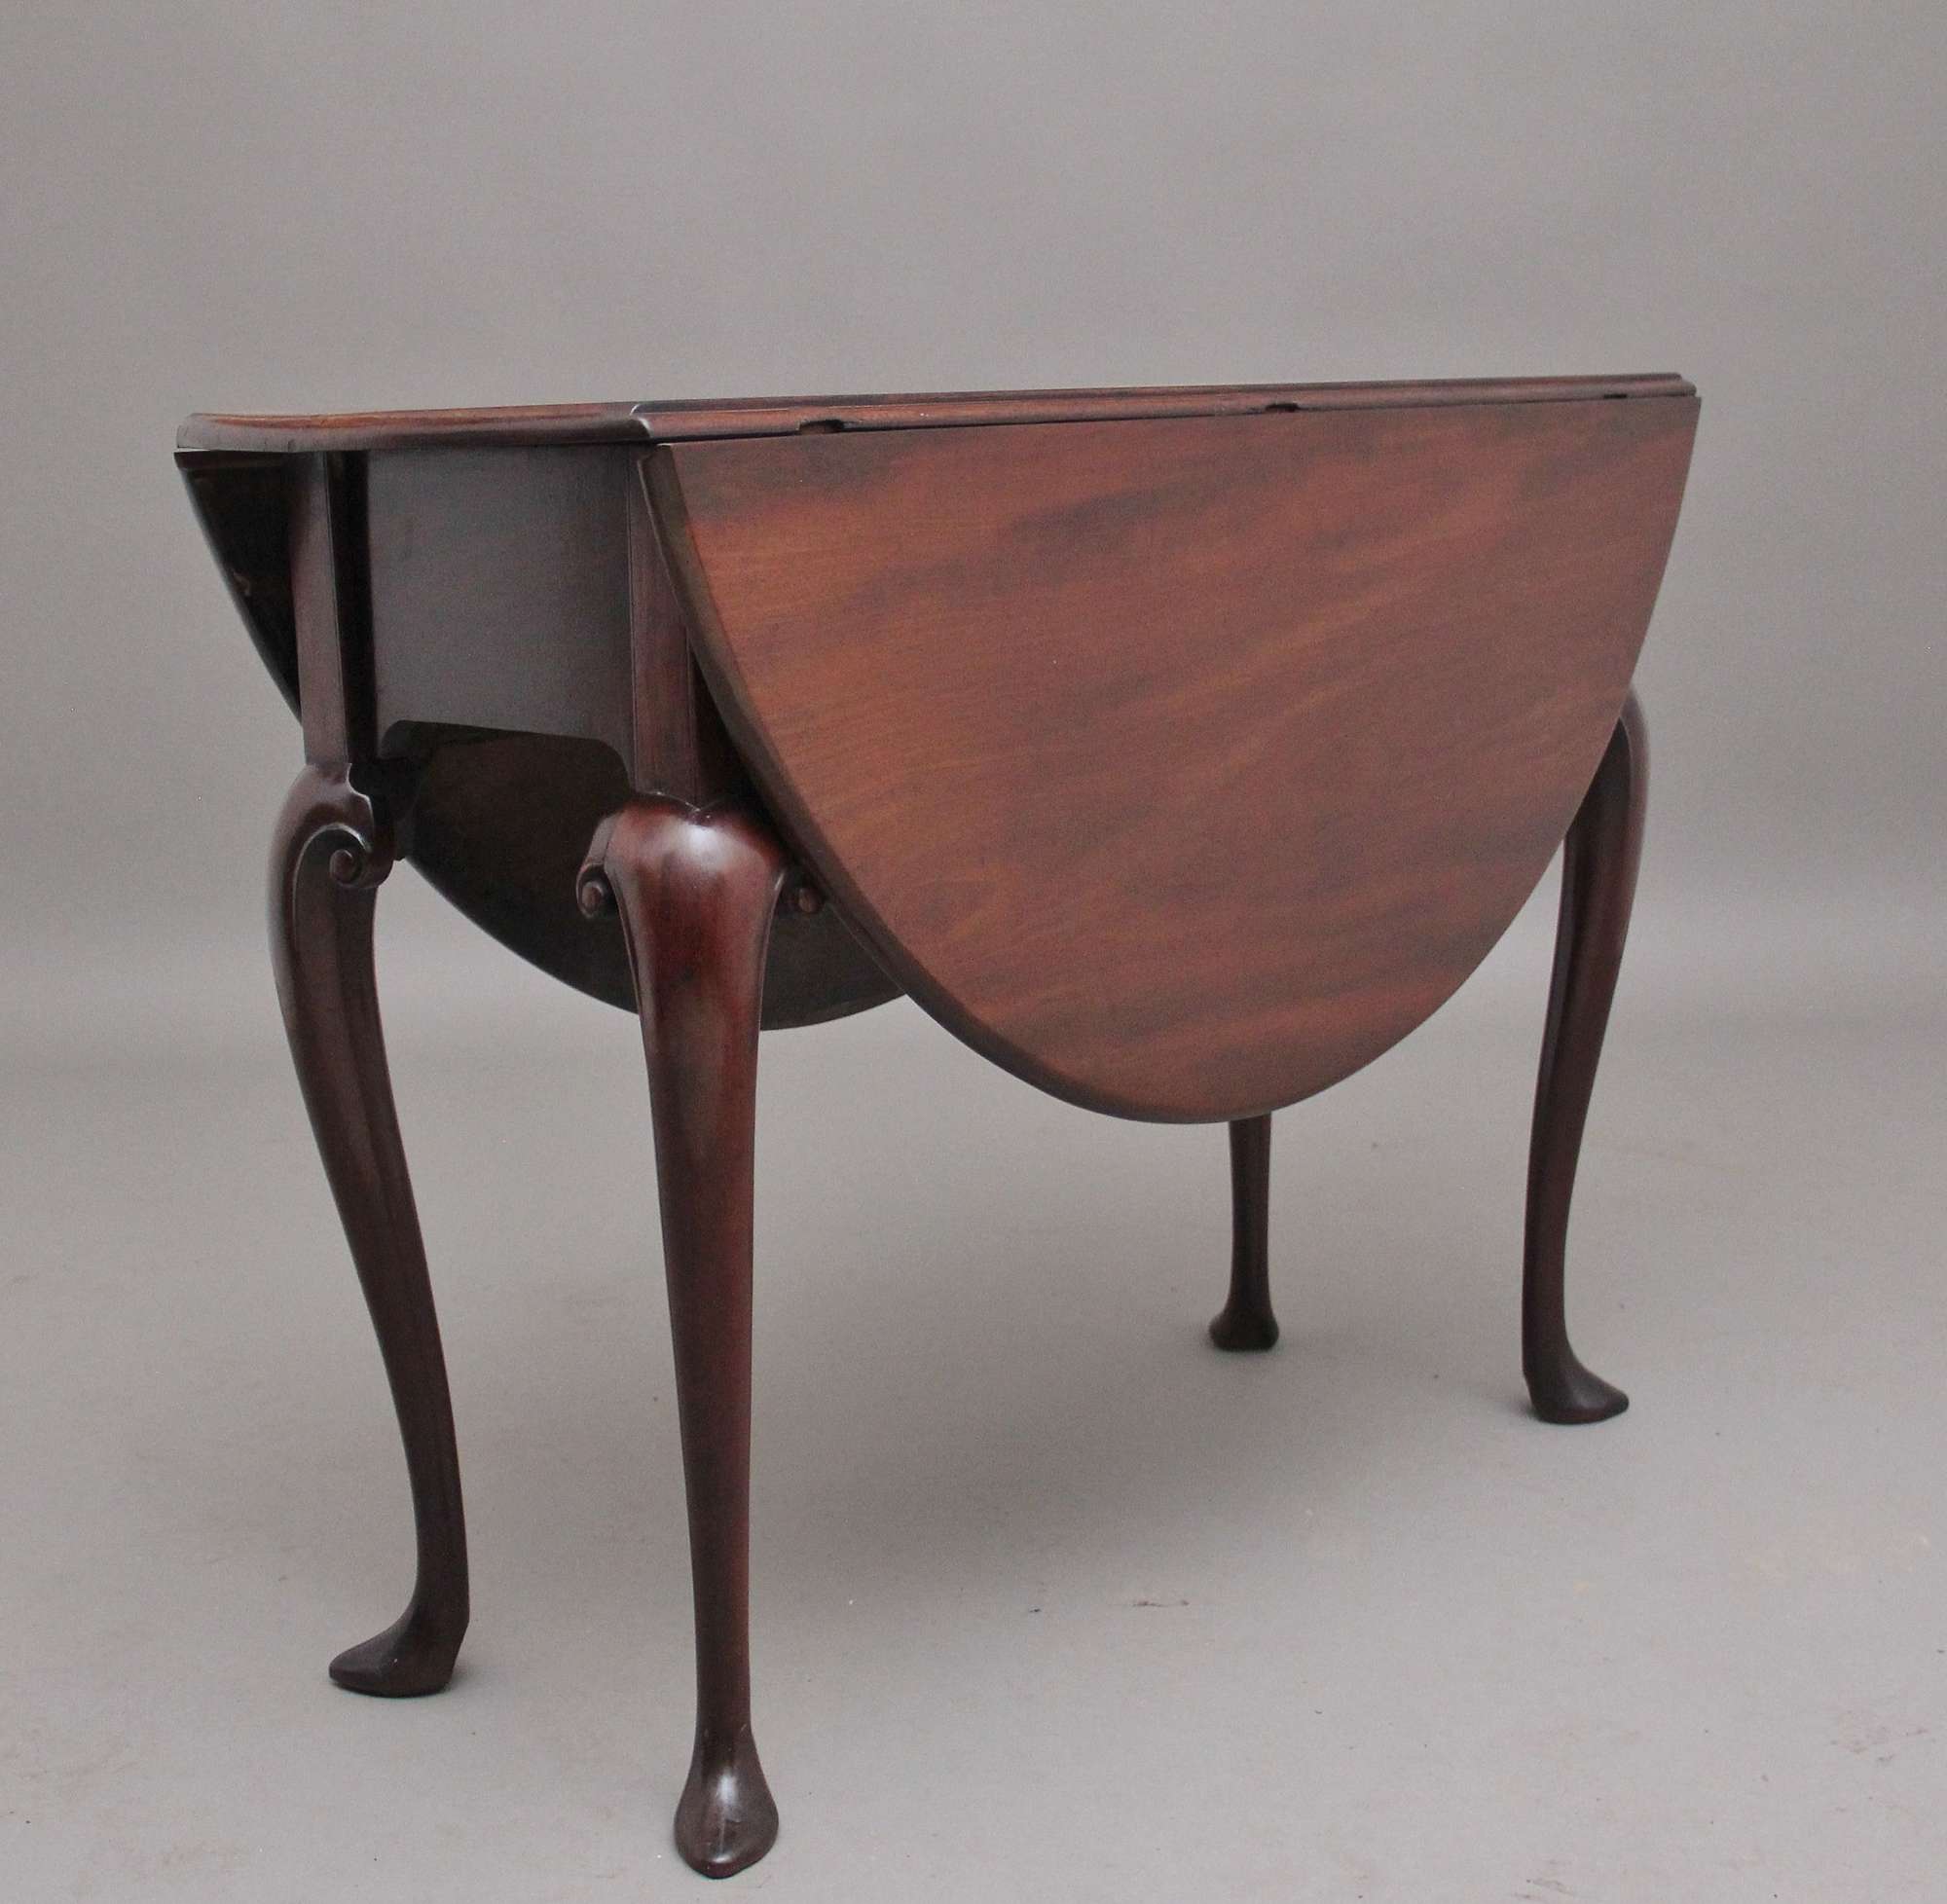 18th Century mahogany drop leaf table from the Georgian period